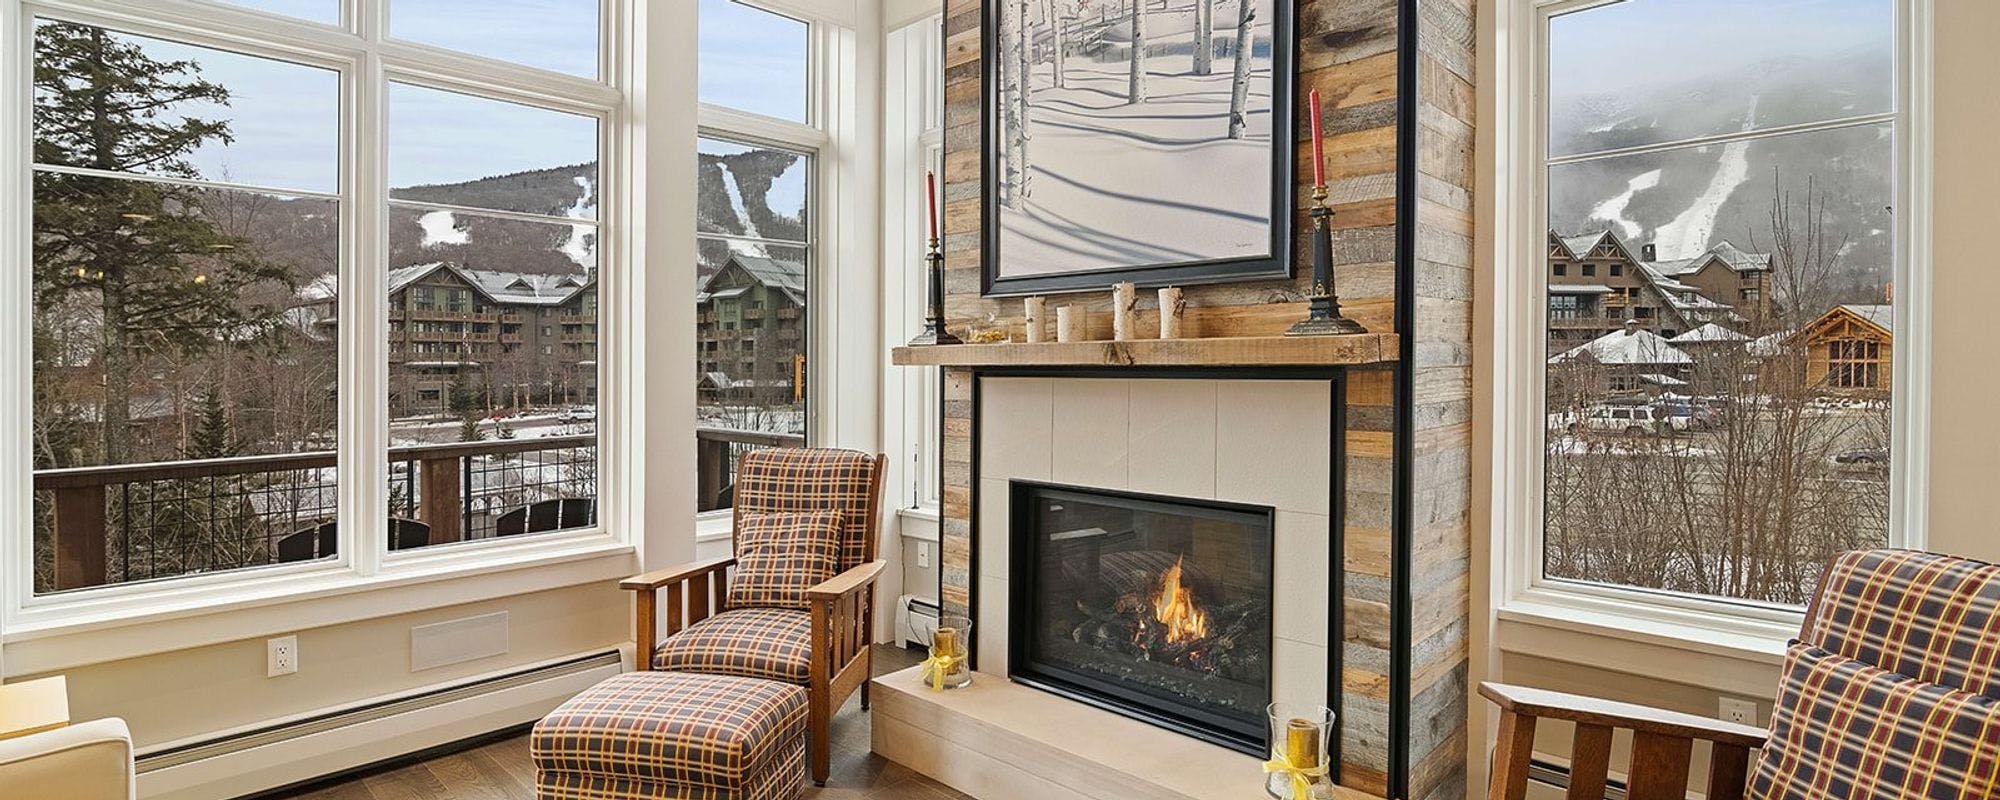 Living space with fireplace in Stowe vacation rental